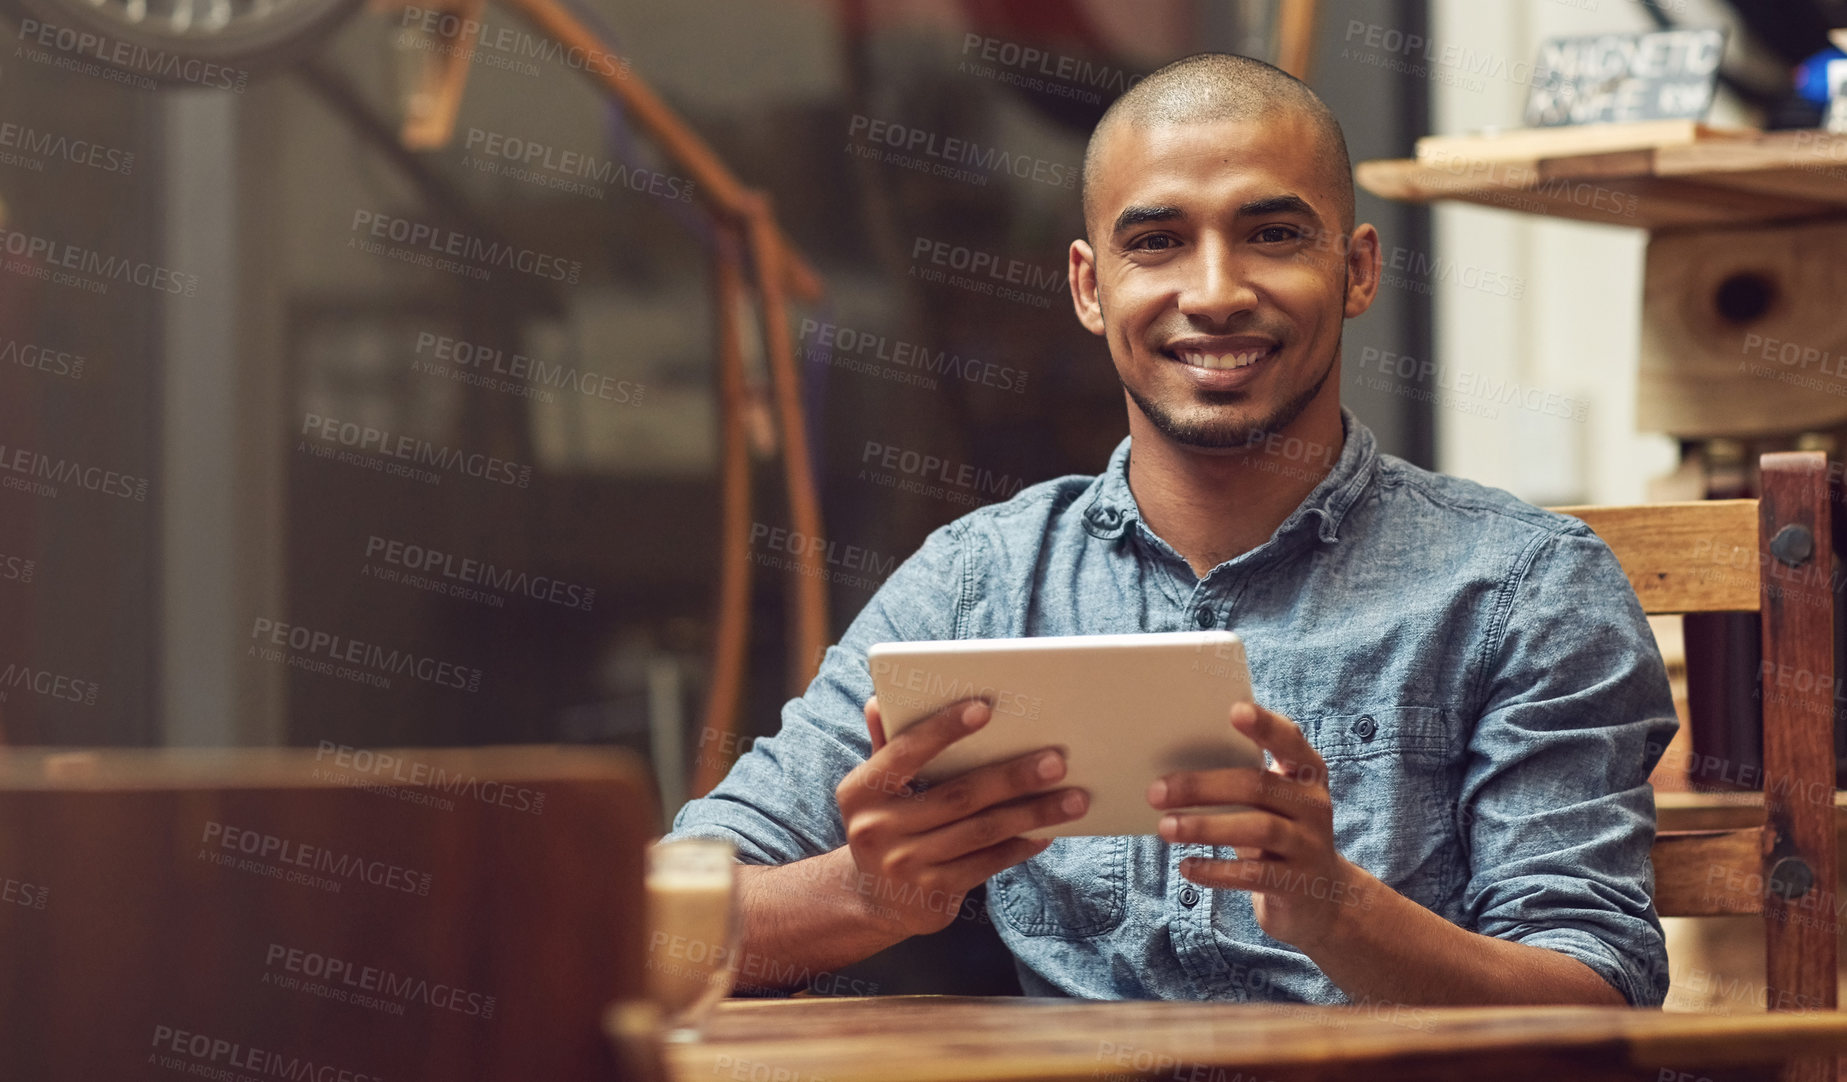 Buy stock photo Portrait of a young entrepreneur using a digital tablet in his store